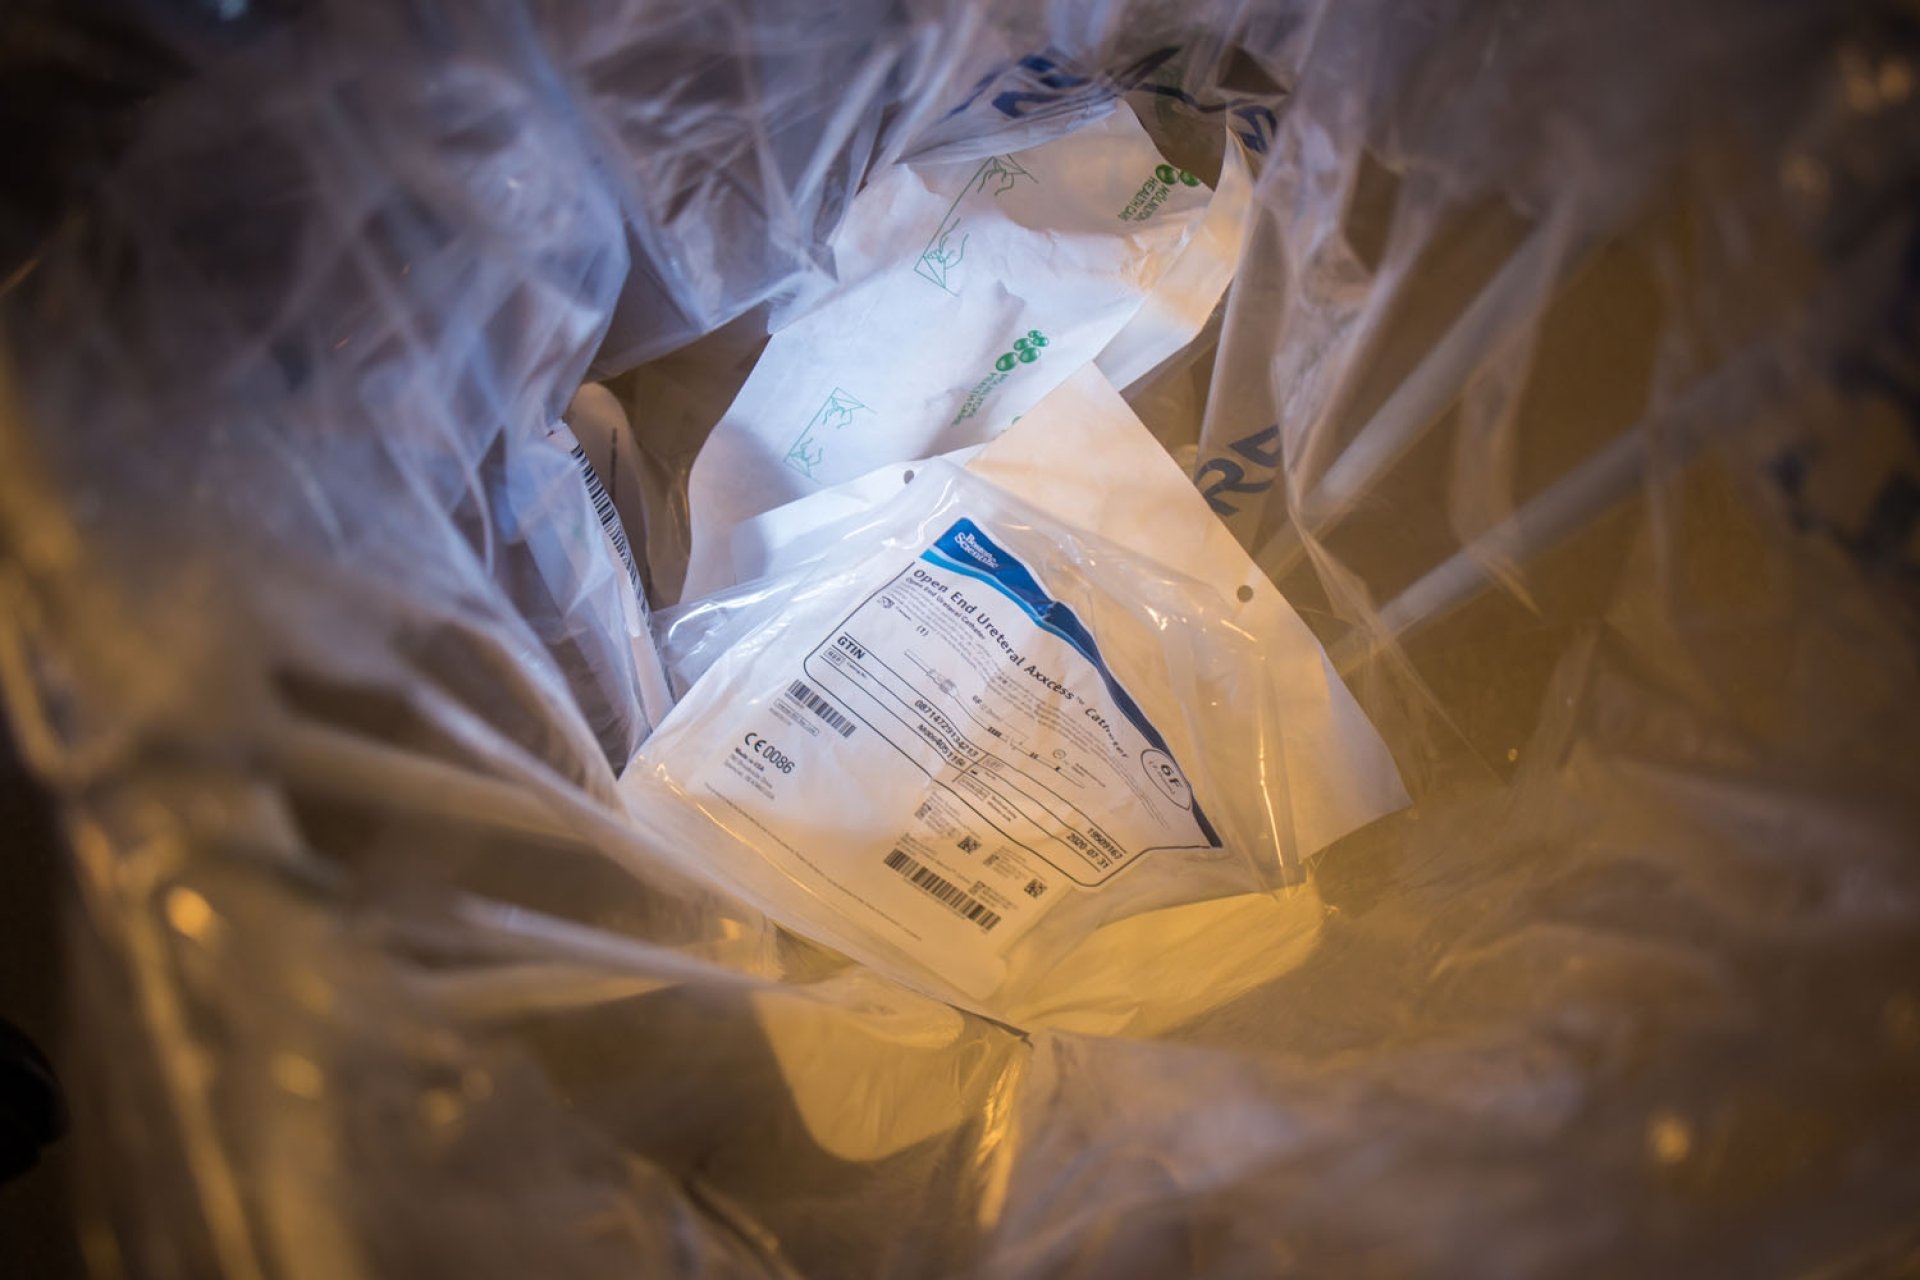 Given the right design, plastic packaging for medical devices can be high-quality and therefore recyclable. Photo: Michael Harder, Aarhaus University Hospital.